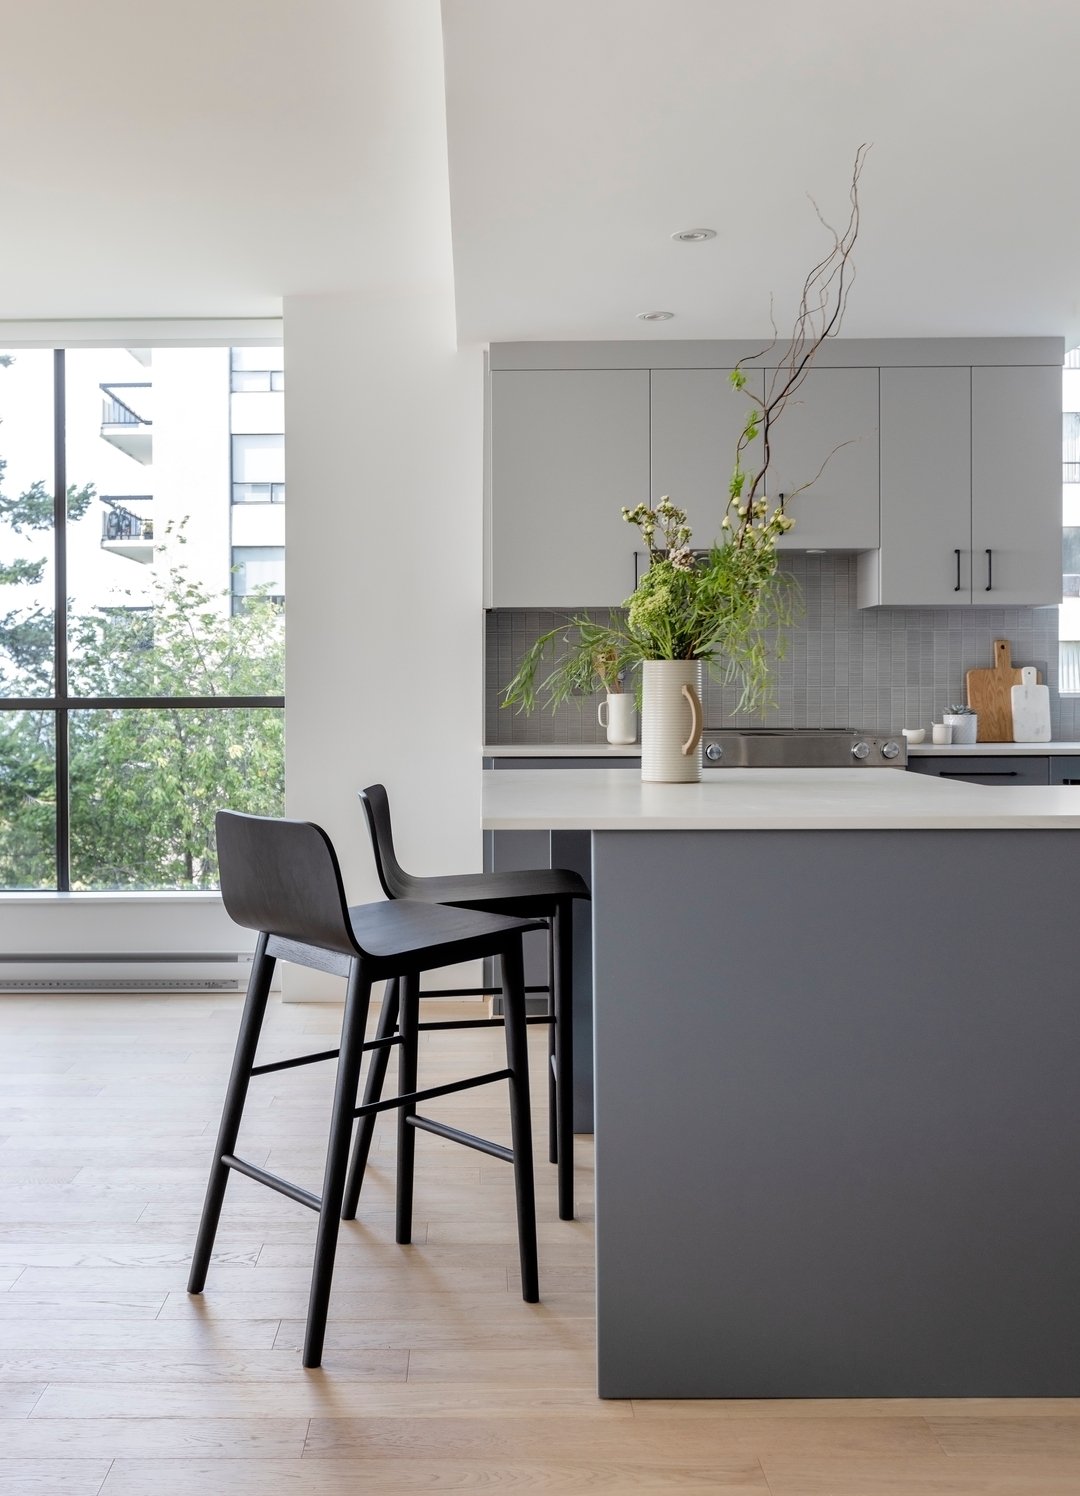 This recently revamped kitchen is now the heart of the home, blending sleek style with functionality!

Photo: @janisnicolayphotography
Design: @thehavencltv
Styling: @thehavencltv +@jvdesigngroup